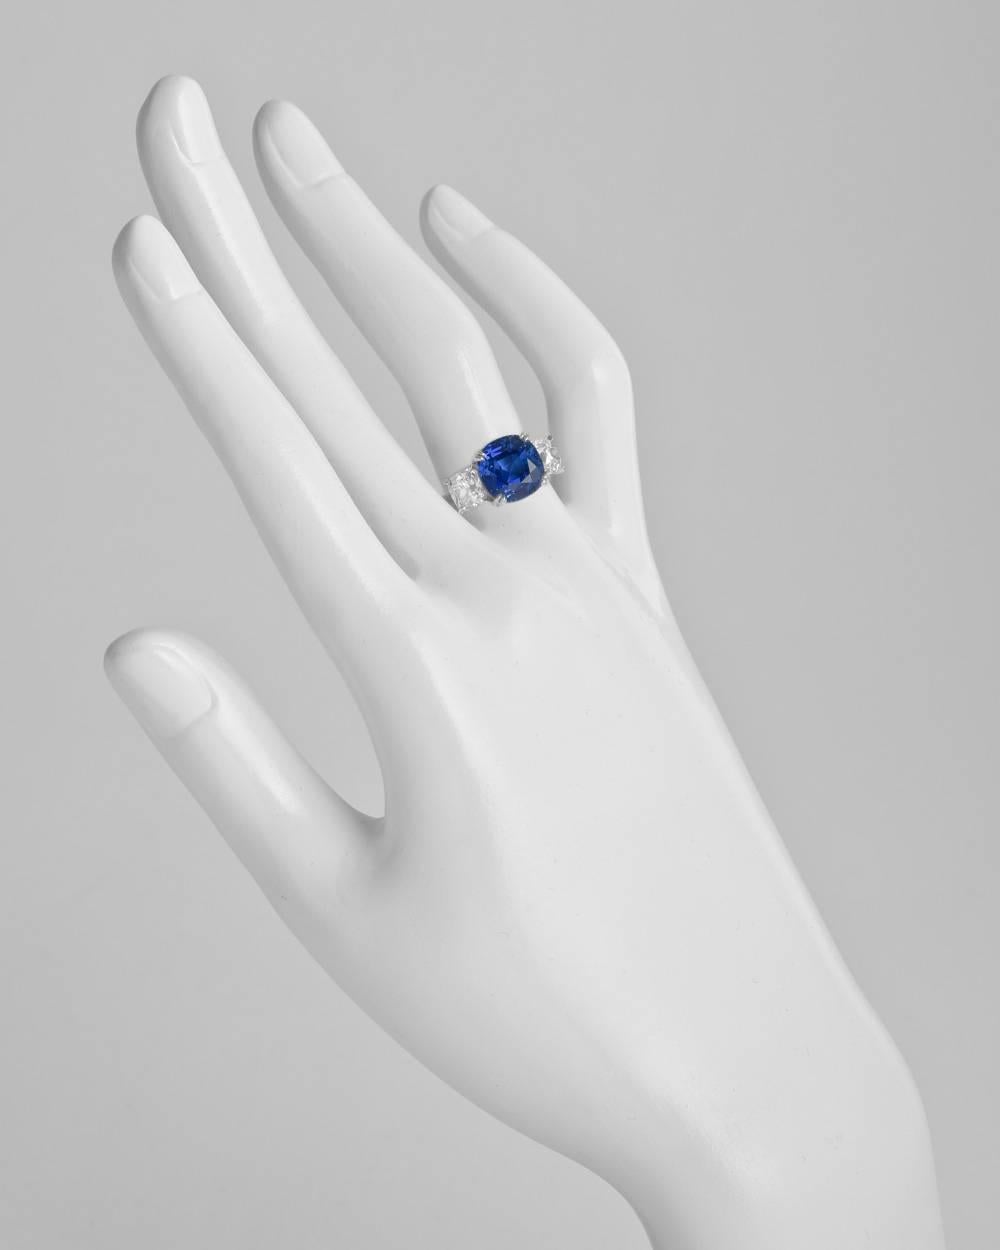 Burmese sapphire and diamond ring, centering a natural cushion-shaped sapphire weighing 7.23 carats, flanked by two near-colorless old mine brilliant cut diamonds weighing 2.00 total carats (both GIA-certified: G-H color/SI1 clarity), mounted in